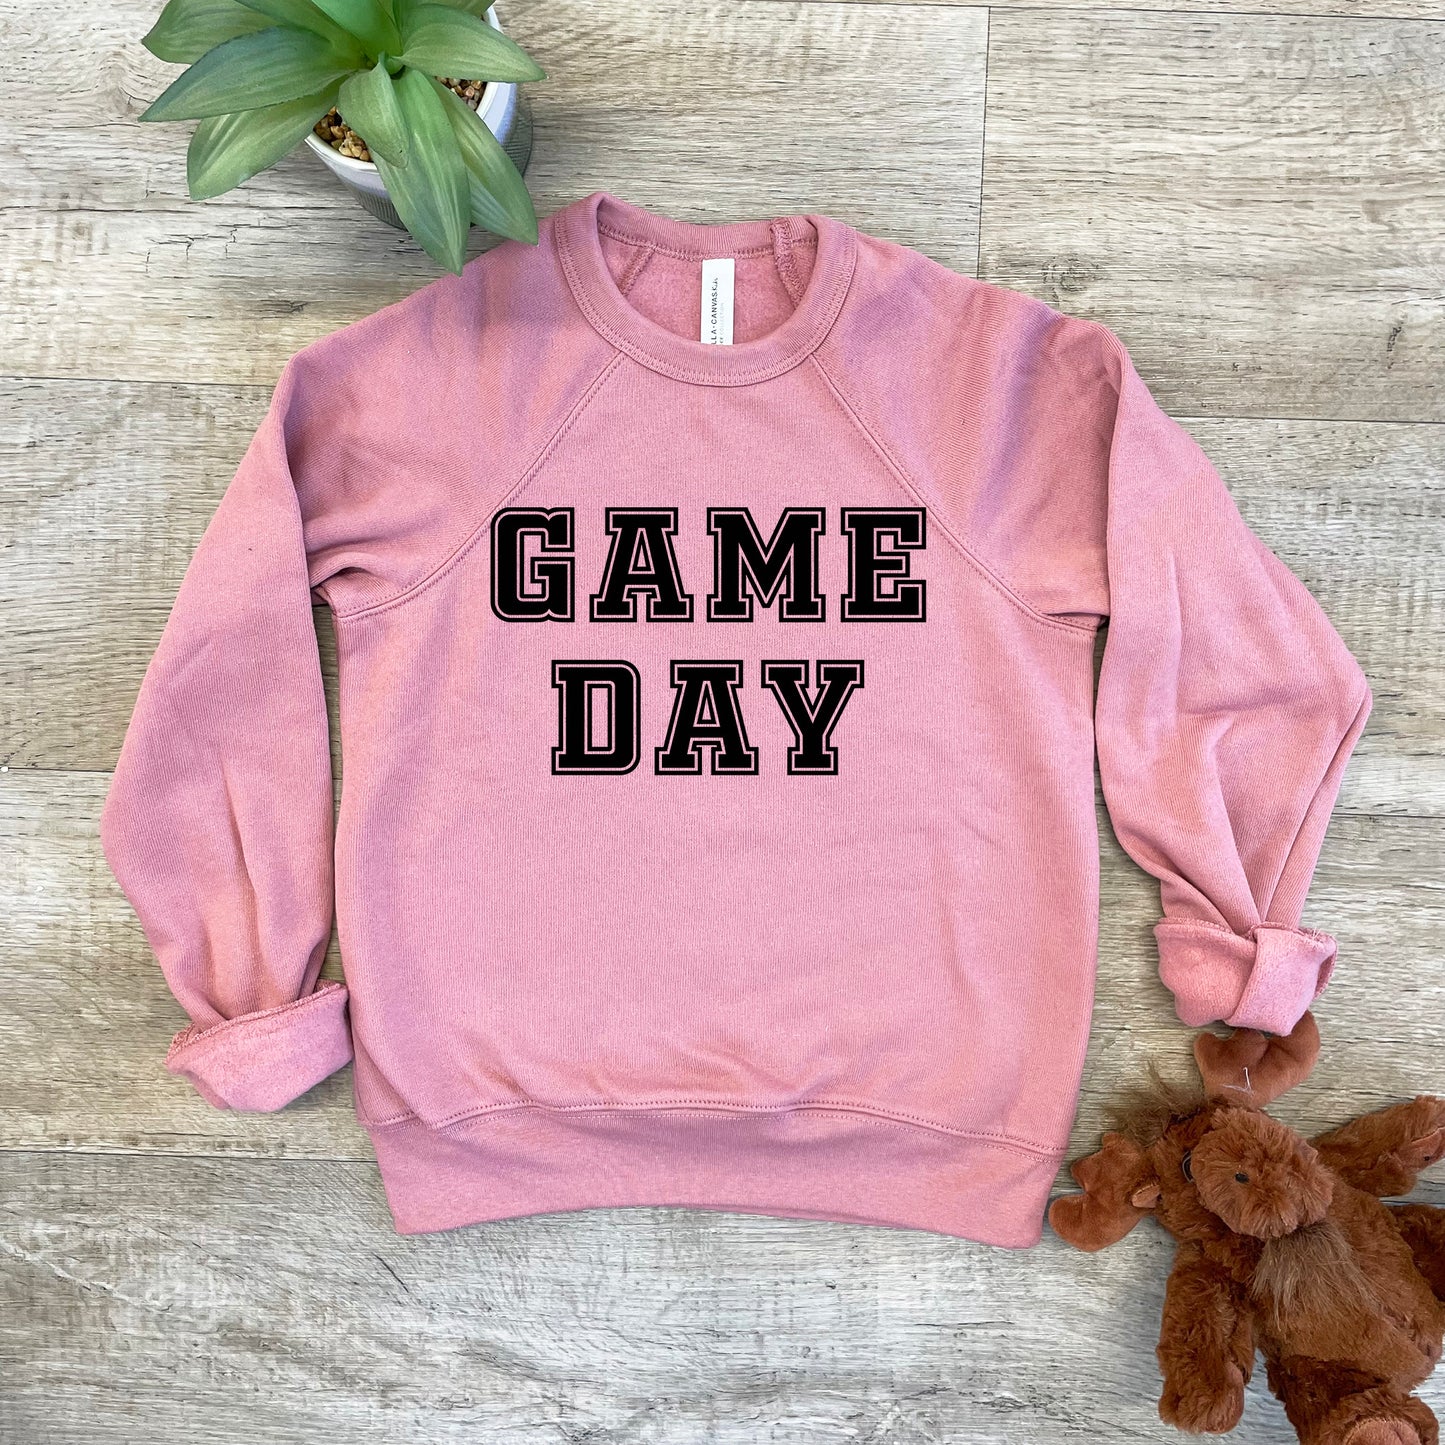 a pink sweatshirt that says game day next to a teddy bear